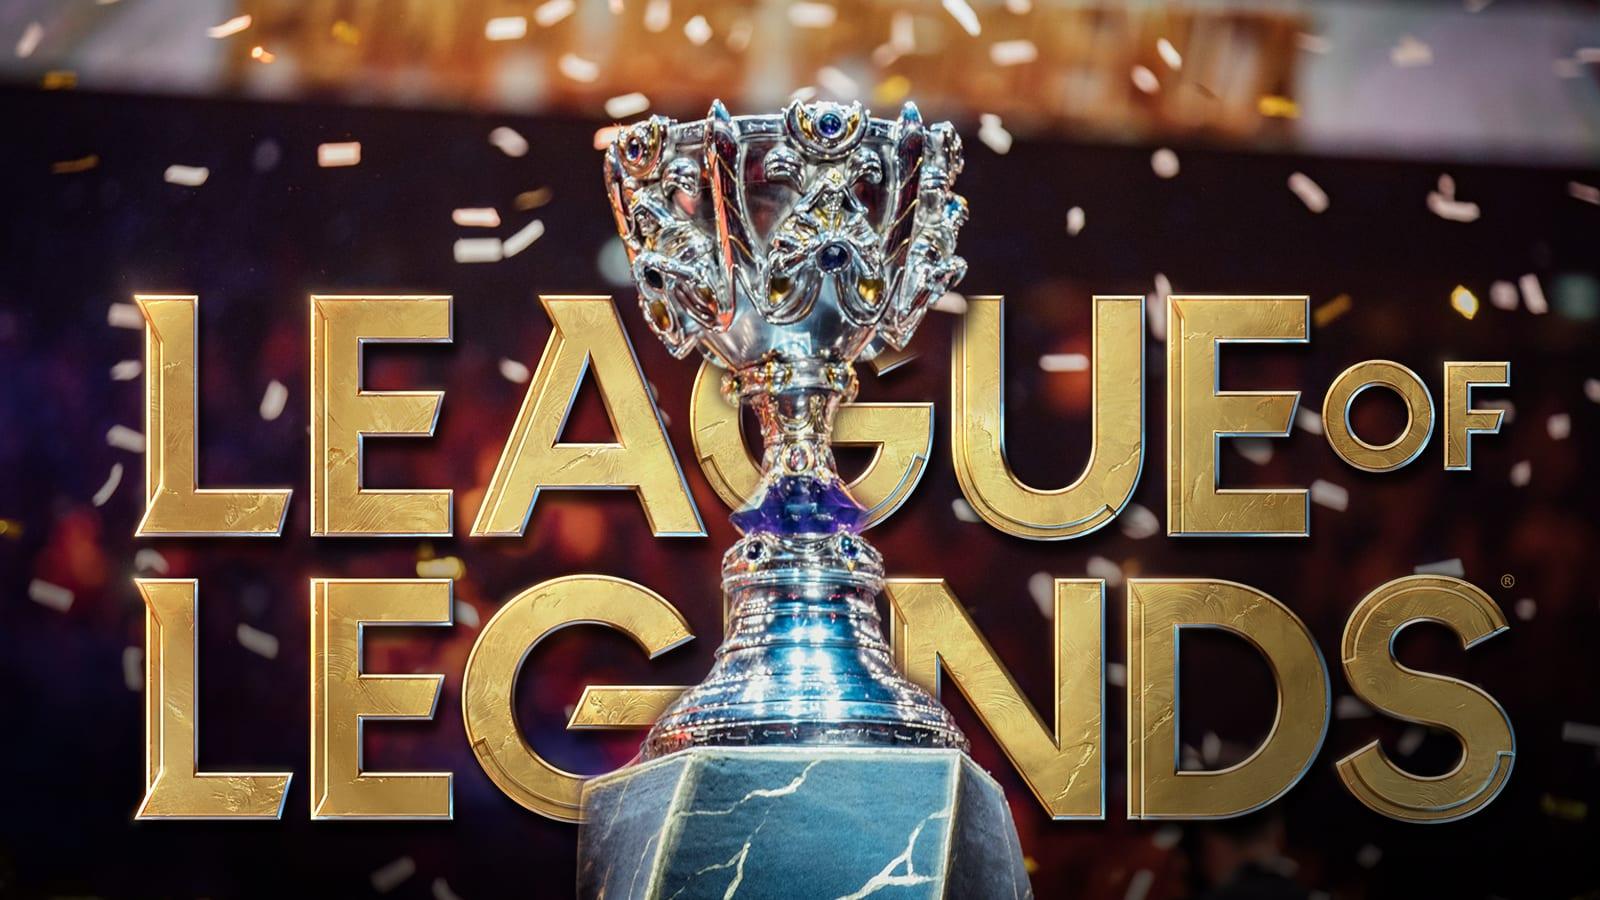 LoL Worlds 2021: Which teams qualified for the Playoffs